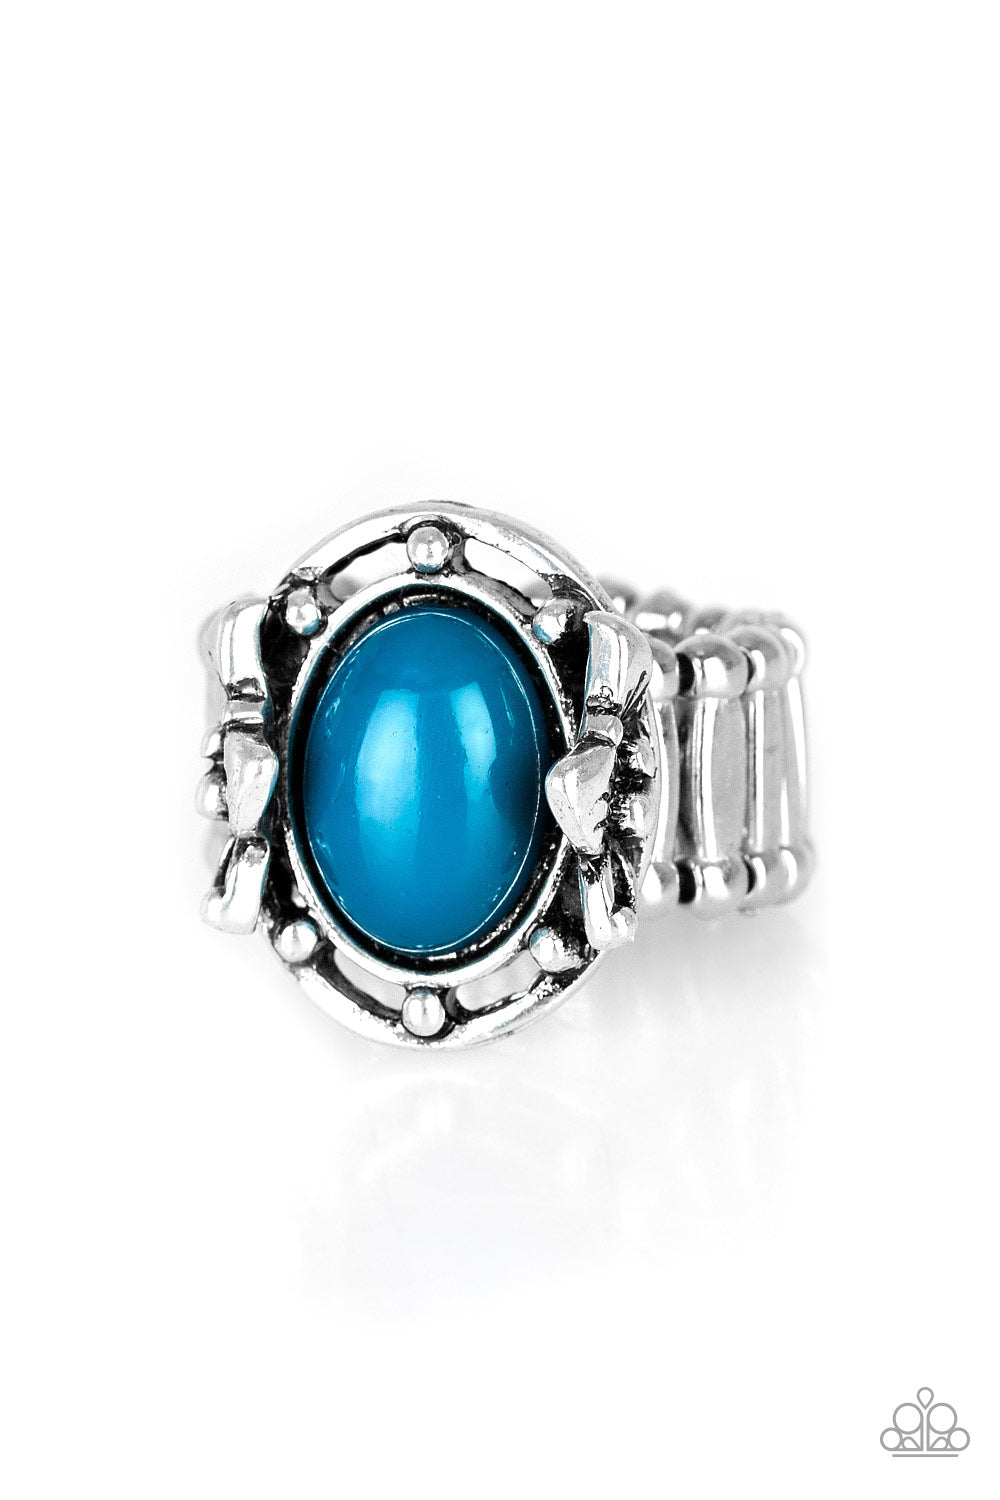 A polished blue bead is pressed into the center of a silver frame blooming with floral details for a whimsical finish. Features a stretchy band for a flexible fit.